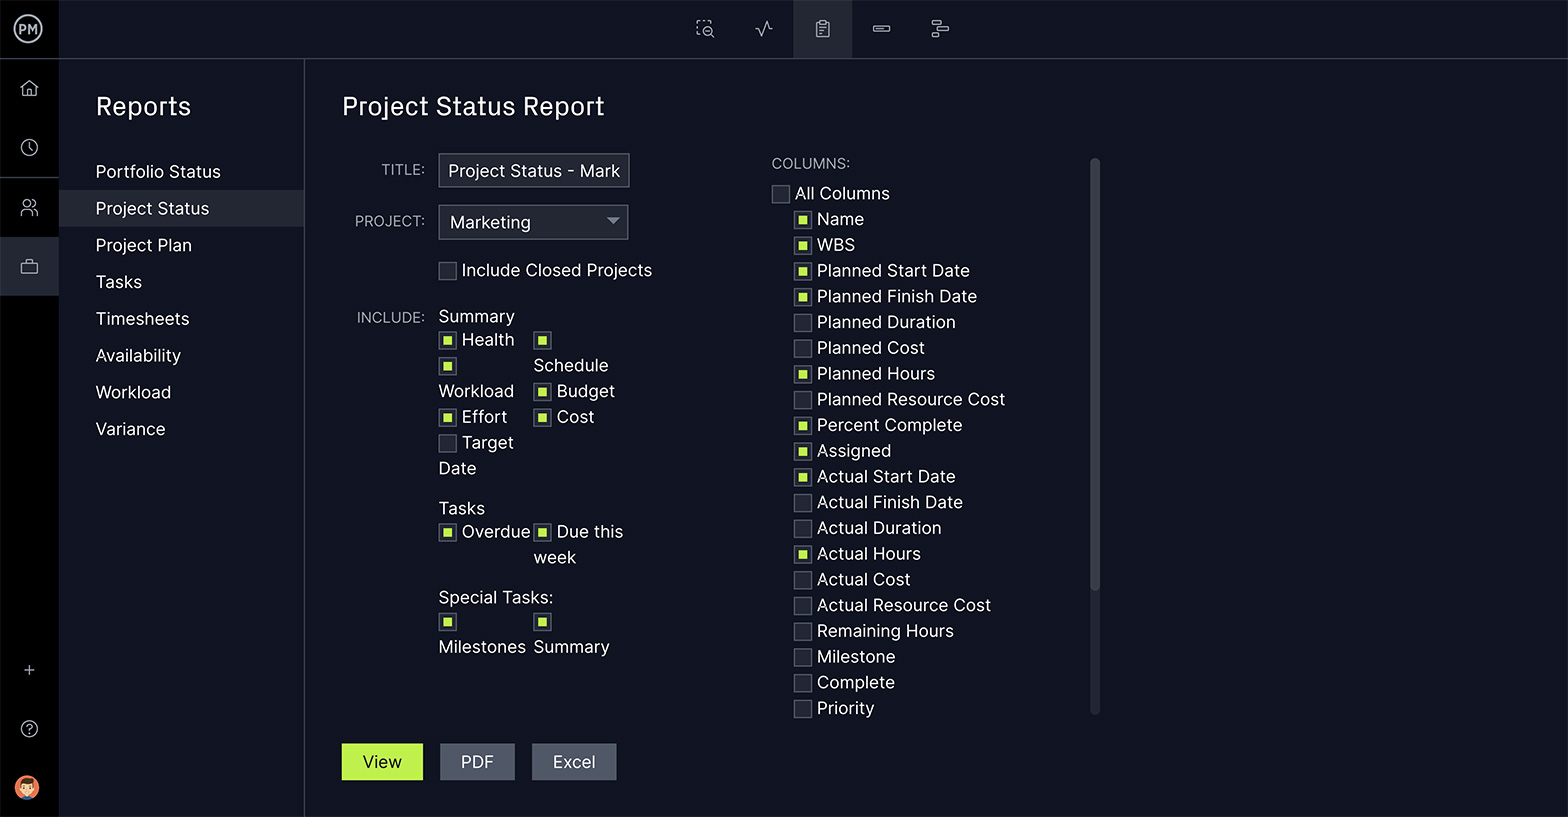 A screenshot of a report generated by ProjectManager.com